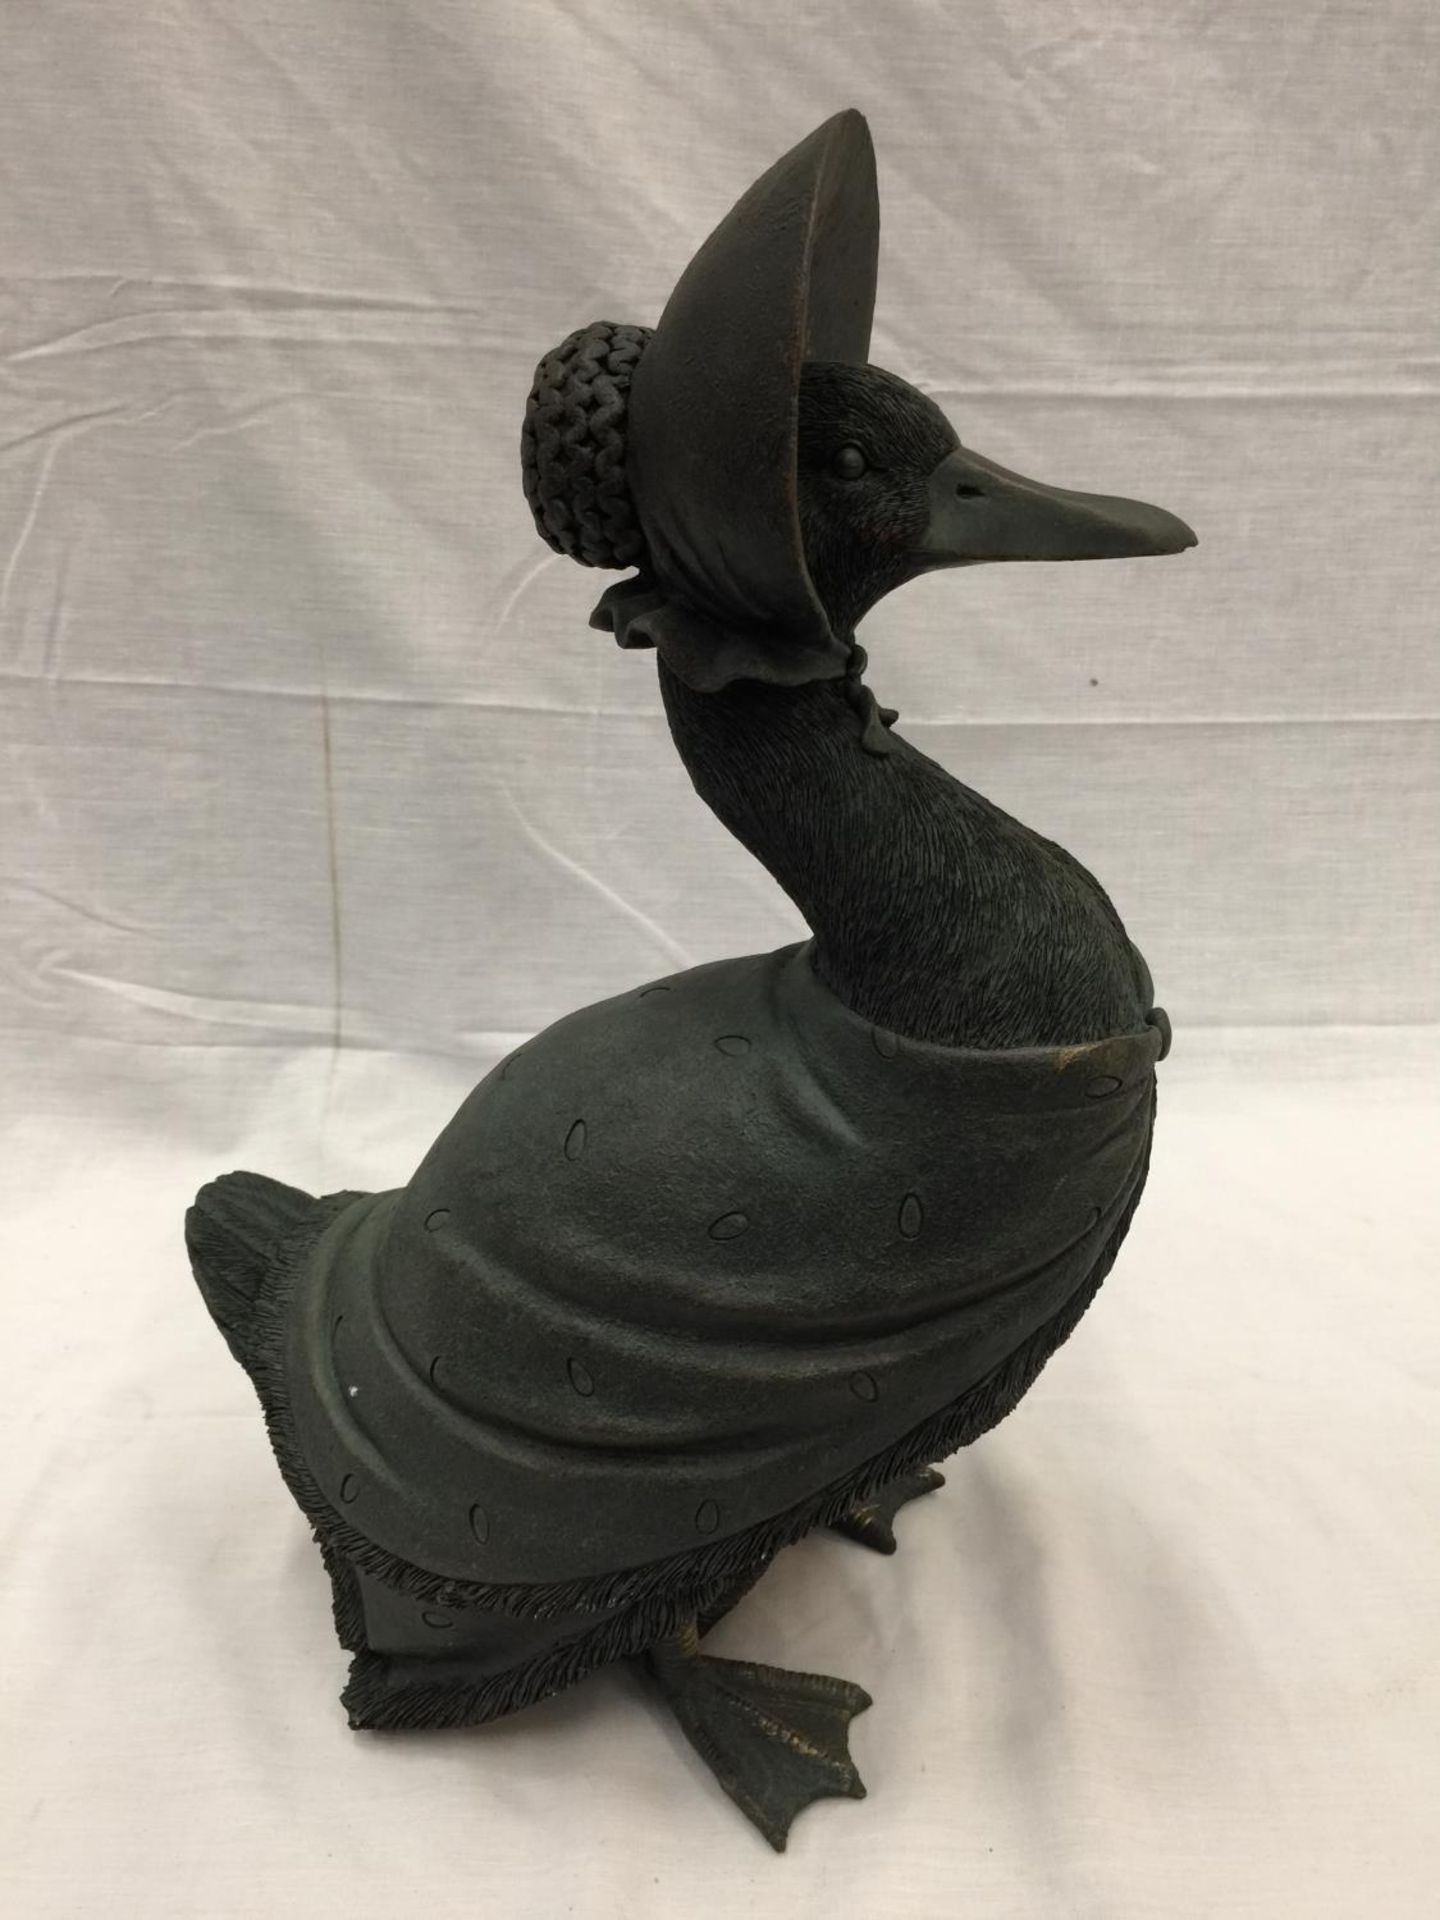 A GEMIMA PUDDLE DUCK GARDEN ORNAMENT H: 44CM - Image 3 of 3